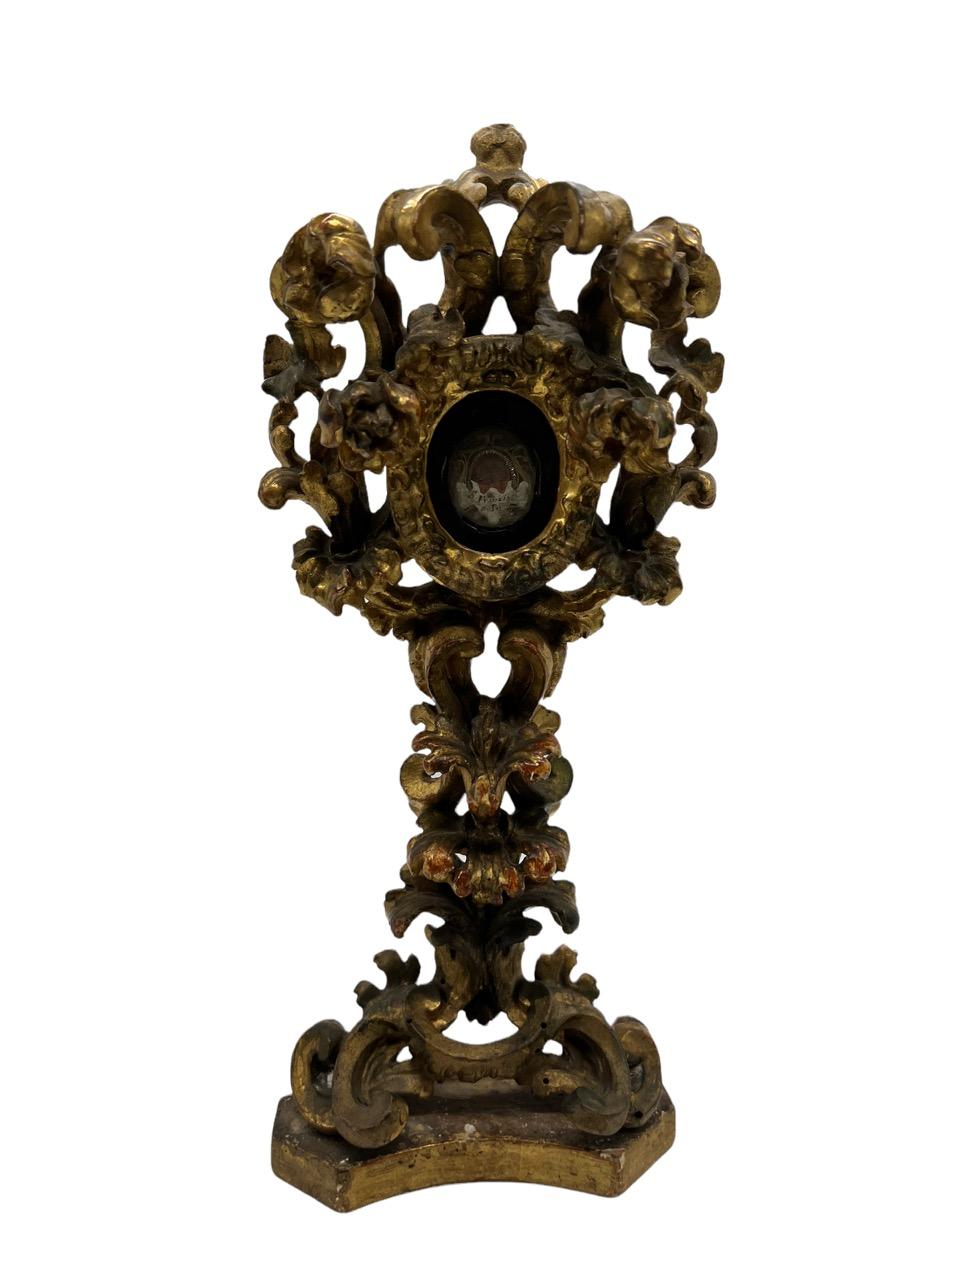 Opulent 18th century Baroque carved giltwood reliquary (a container for relics) monstrance with curled scroll design. It houses a first-class relic of the blood of the15th Century saint St. Francis de Paola (March 27th, 1416 – April 2nd, 1507).